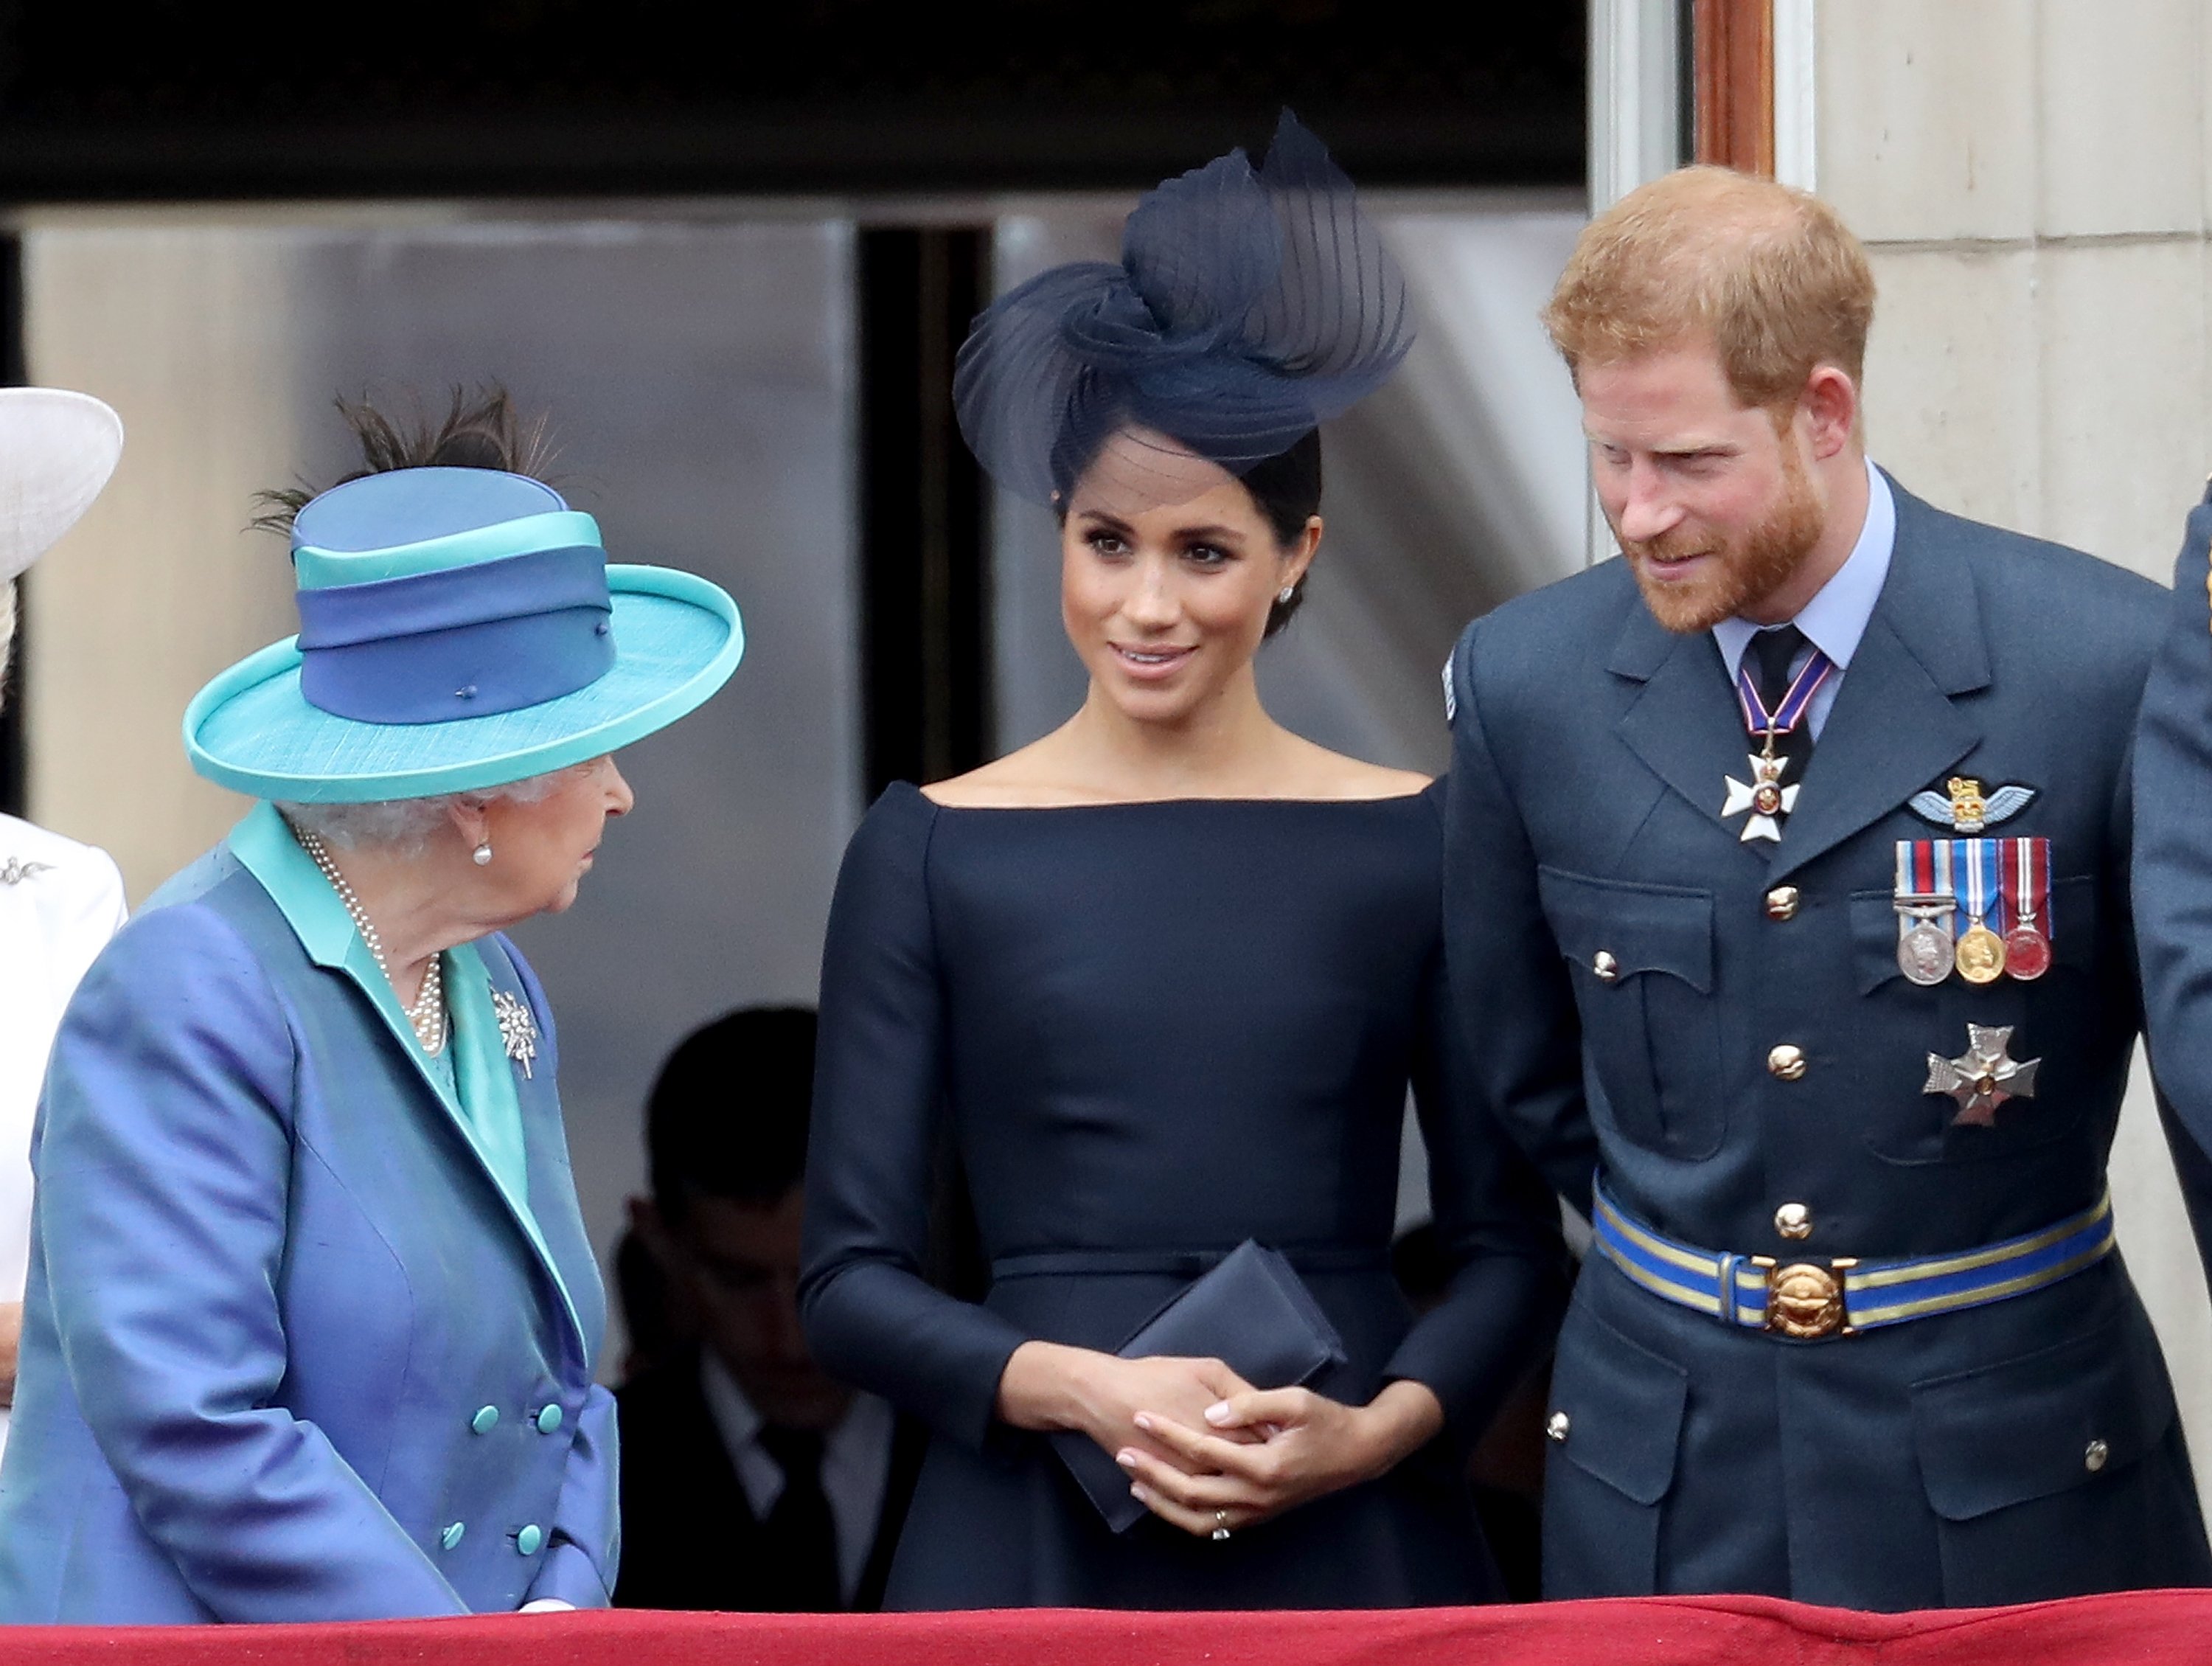 Queen Elizabeth II, Meghan, and Prince Harry, on the balcony of Buckingham Palace, on July 10, 2018 in London, England.  | Source: Getty Images